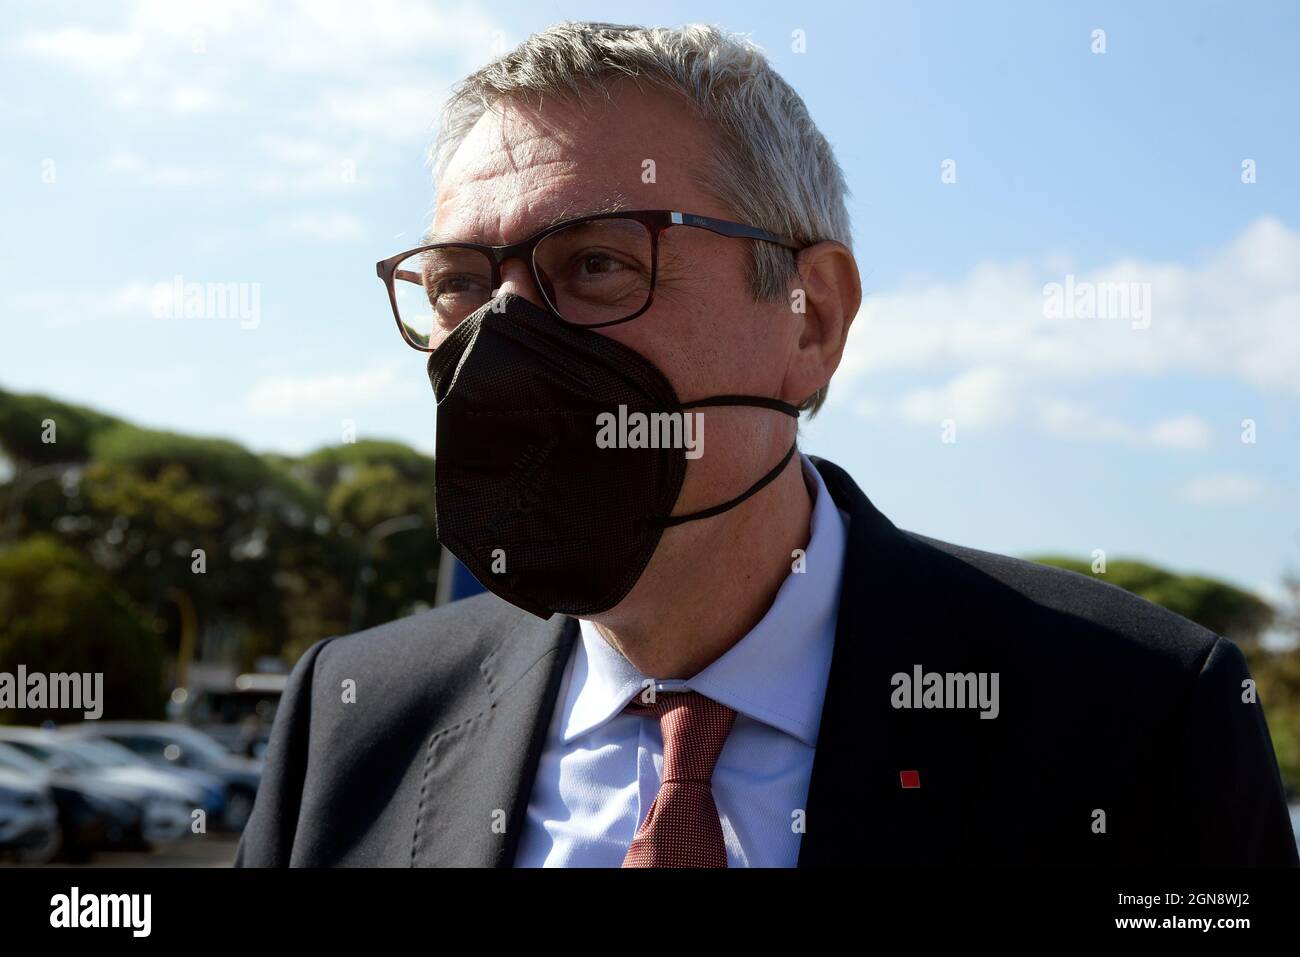 Rome, Italy. 23rd Sep, 2021. The general secretary of the CGIL trade union Maurizio Landini, wearing a protective anti Covid 19 mask, arrives at the annual conference of Confindustria, at the Palazzo dello Sport.Confindustria, is the Italian employers' federation and national chamber of commerce Credit: SOPA Images Limited/Alamy Live News Stock Photo